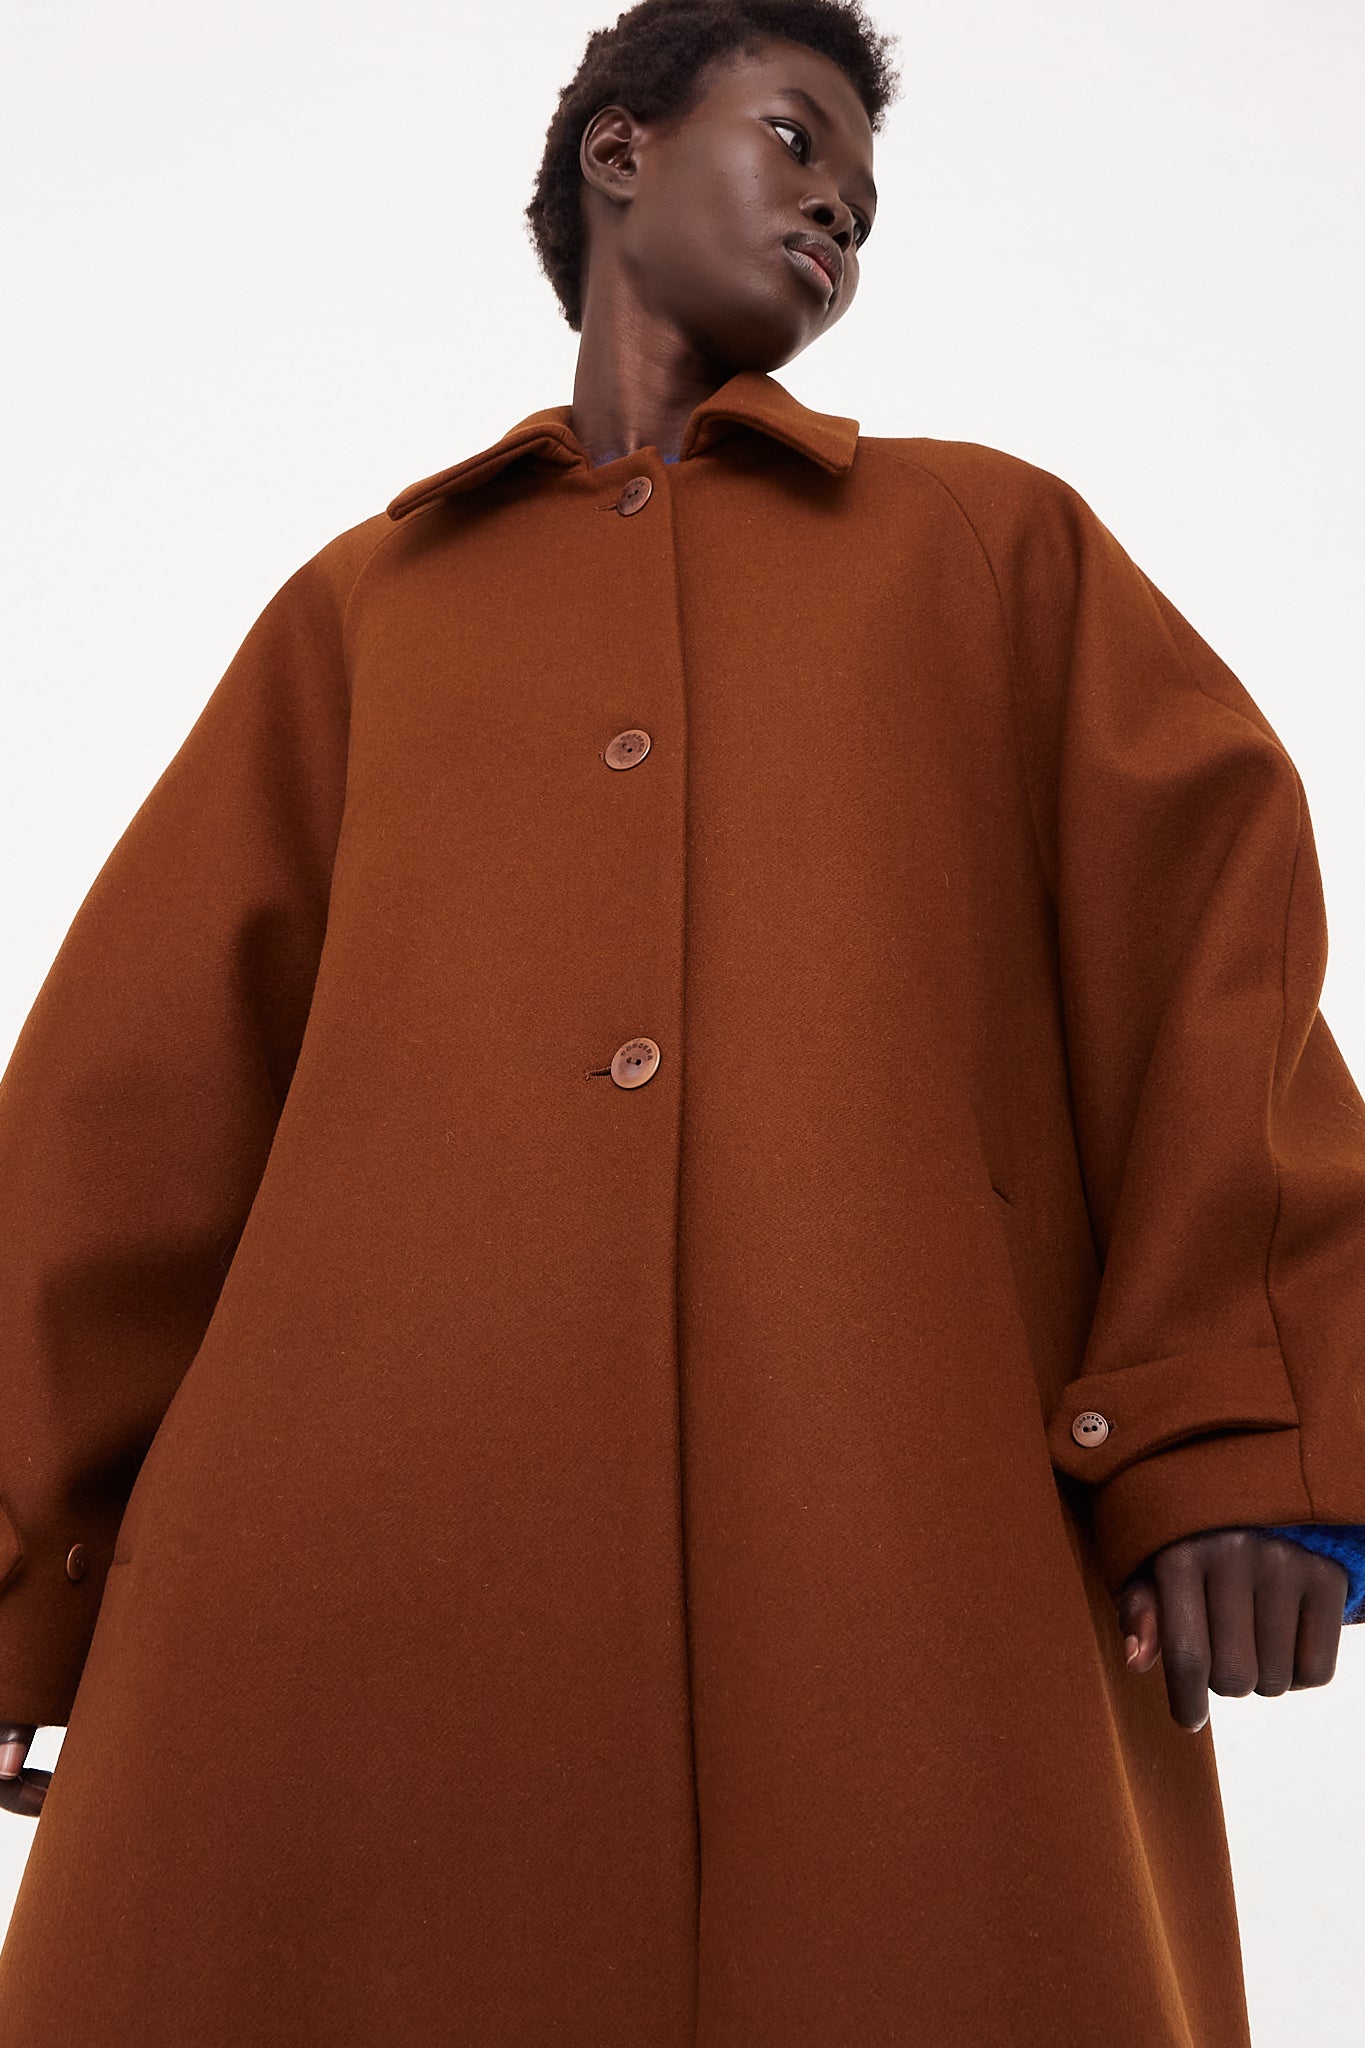 CORDERA Wool Coat Camel | Oroboro Store | Front image of coat upclose buttoned up on model hands out of pocket